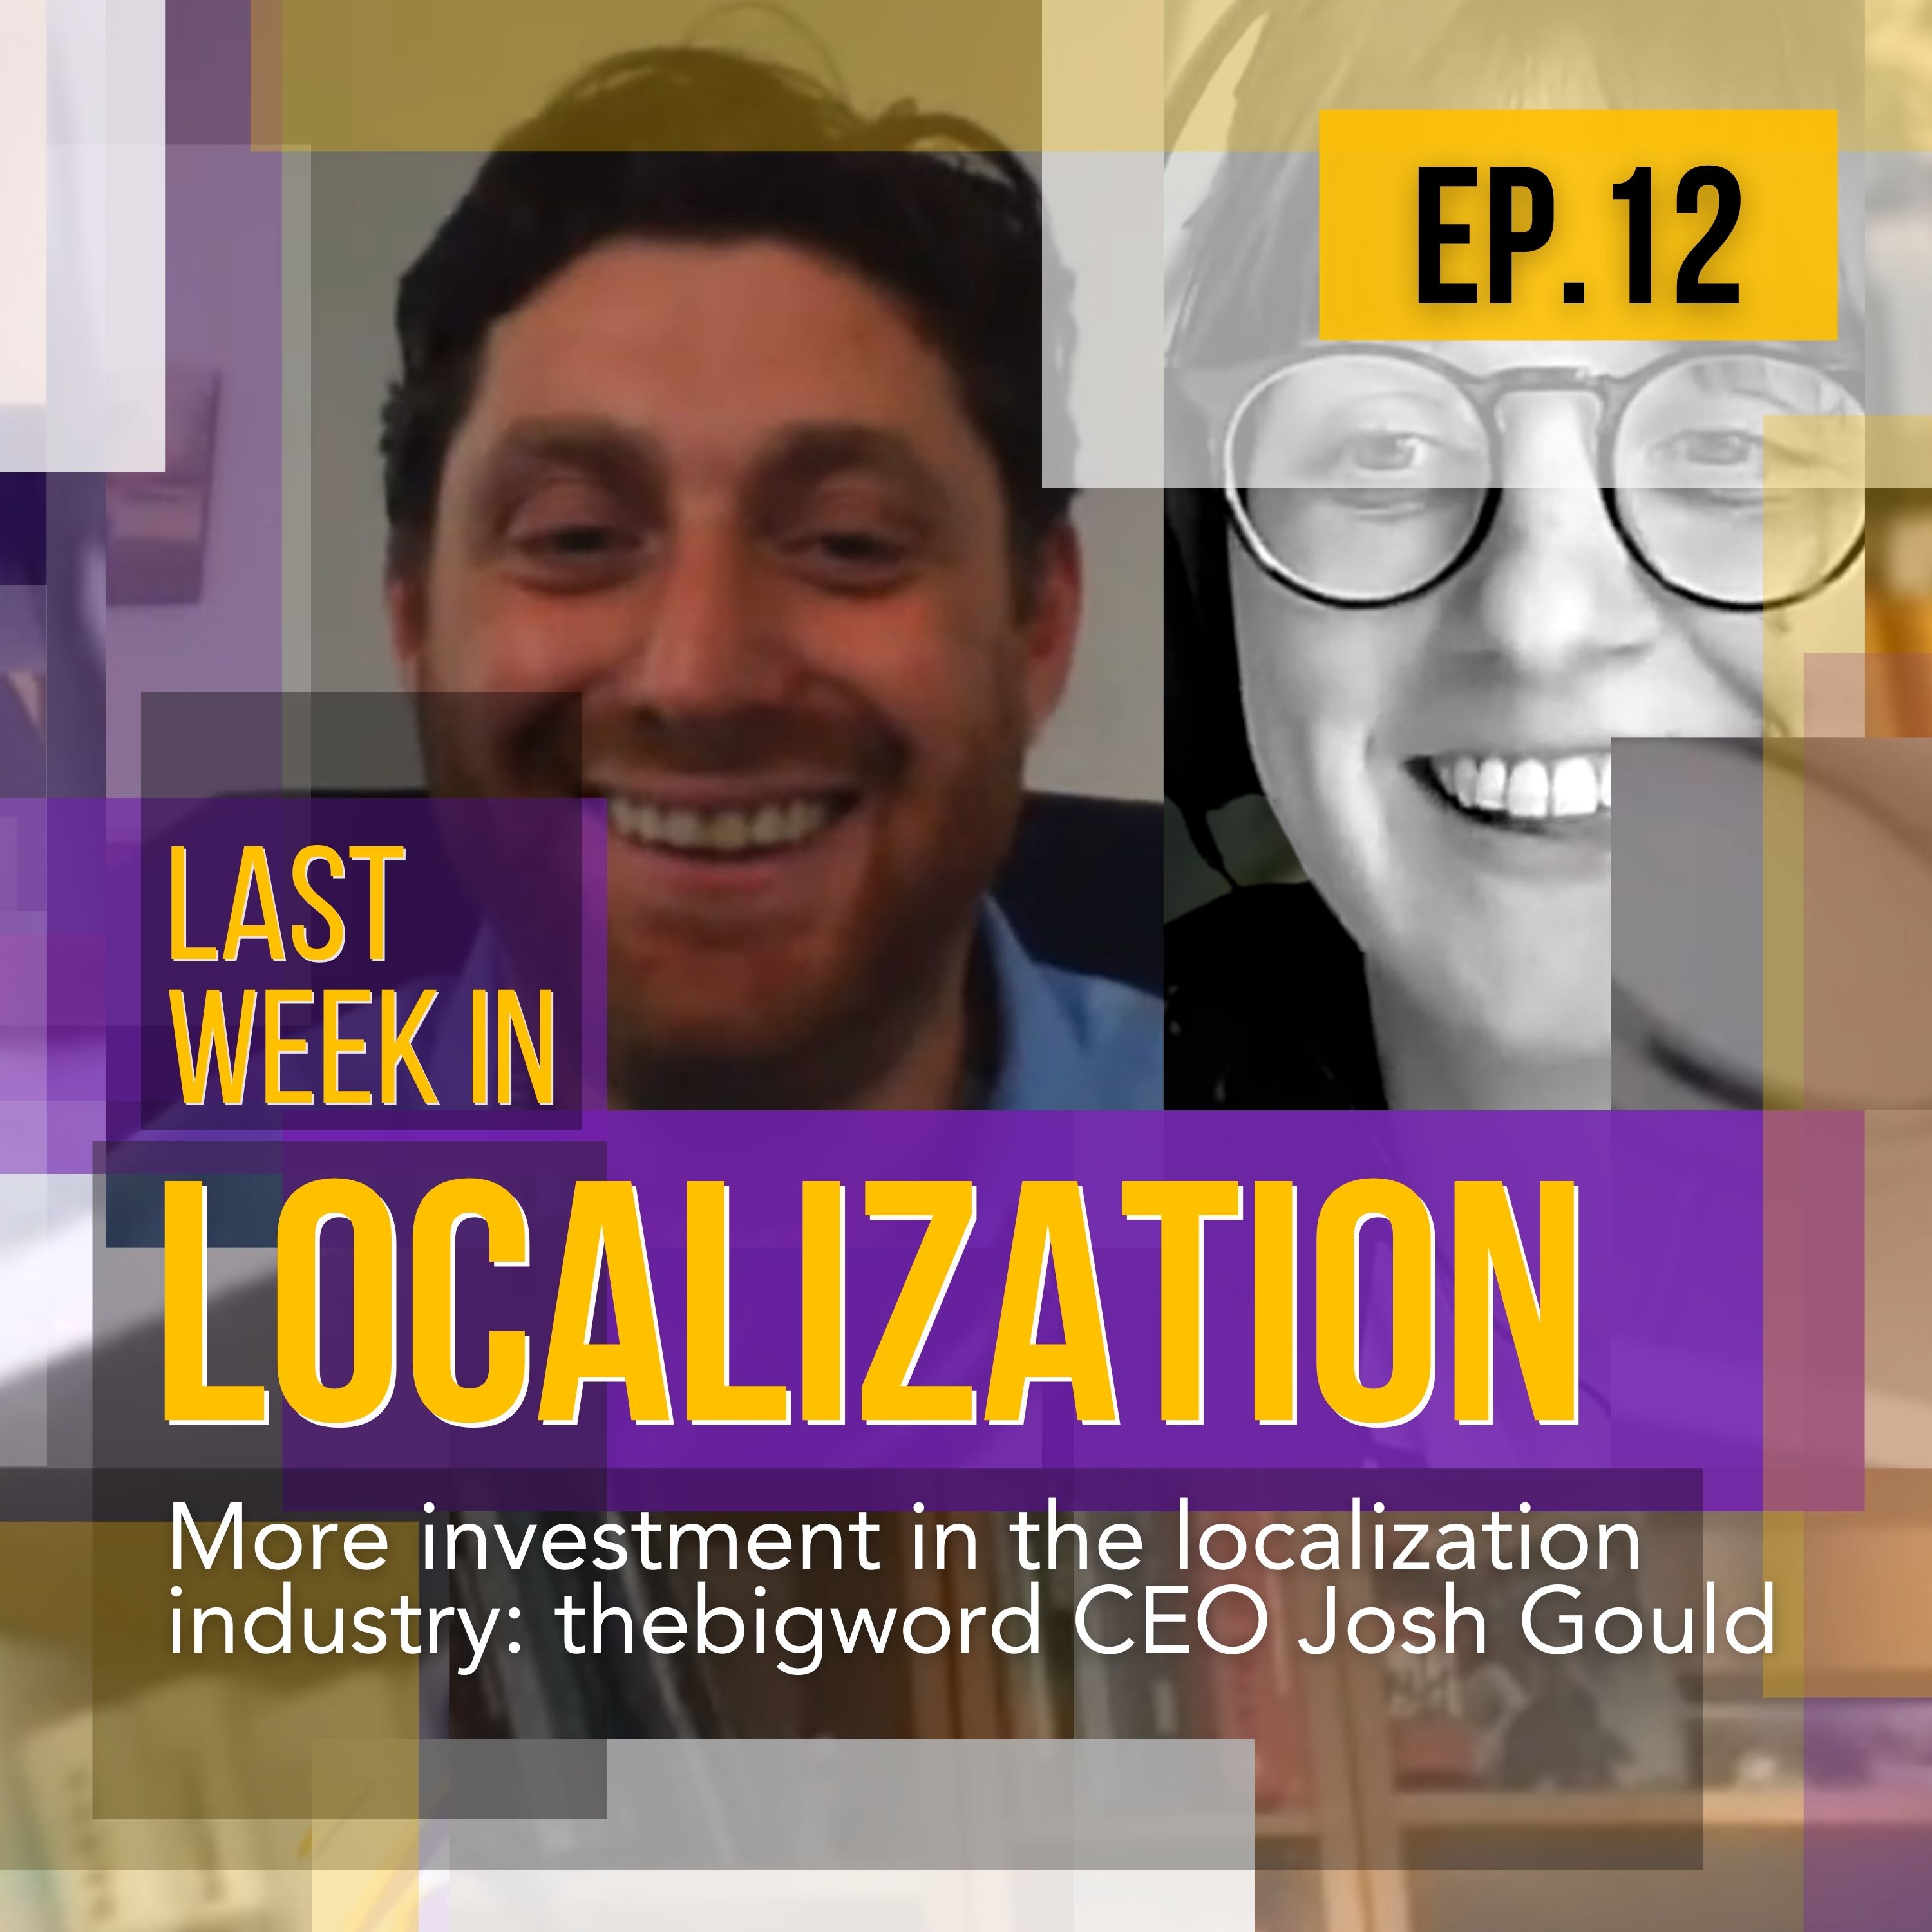 More investment in the localization industry: thebigword CEO Josh Gould